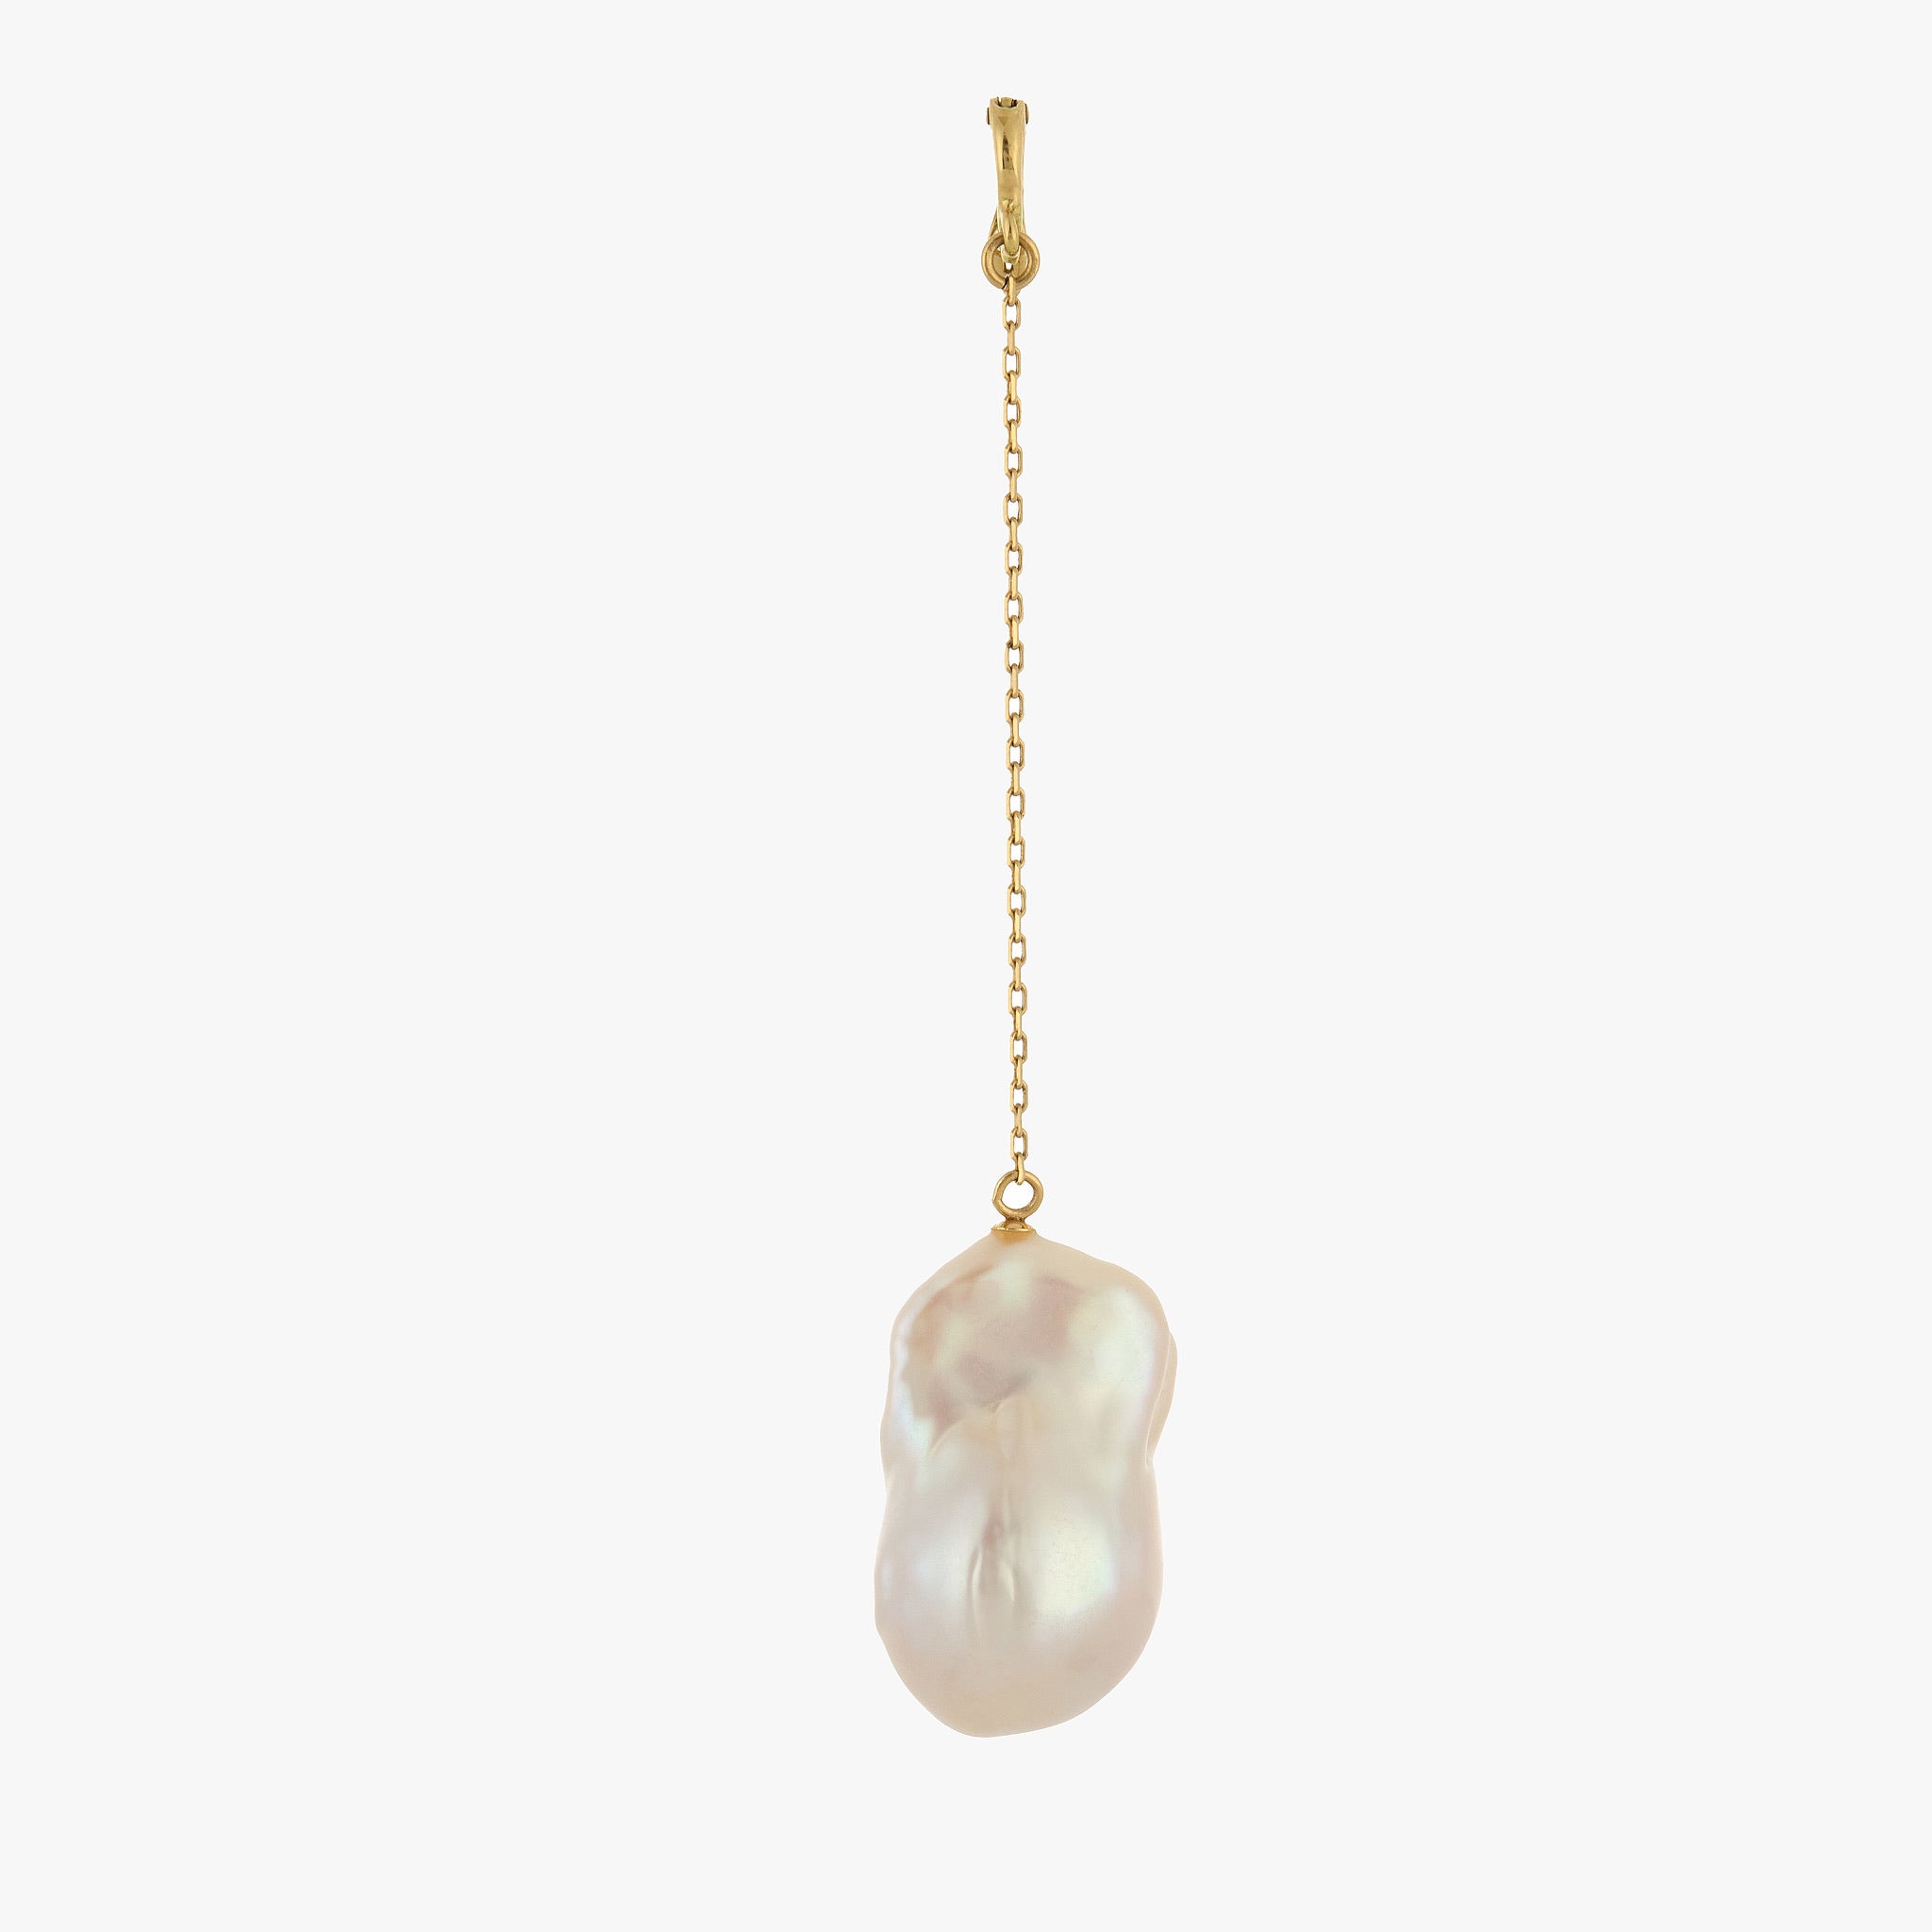 Showcase of Baroque Pearl Charm on white background